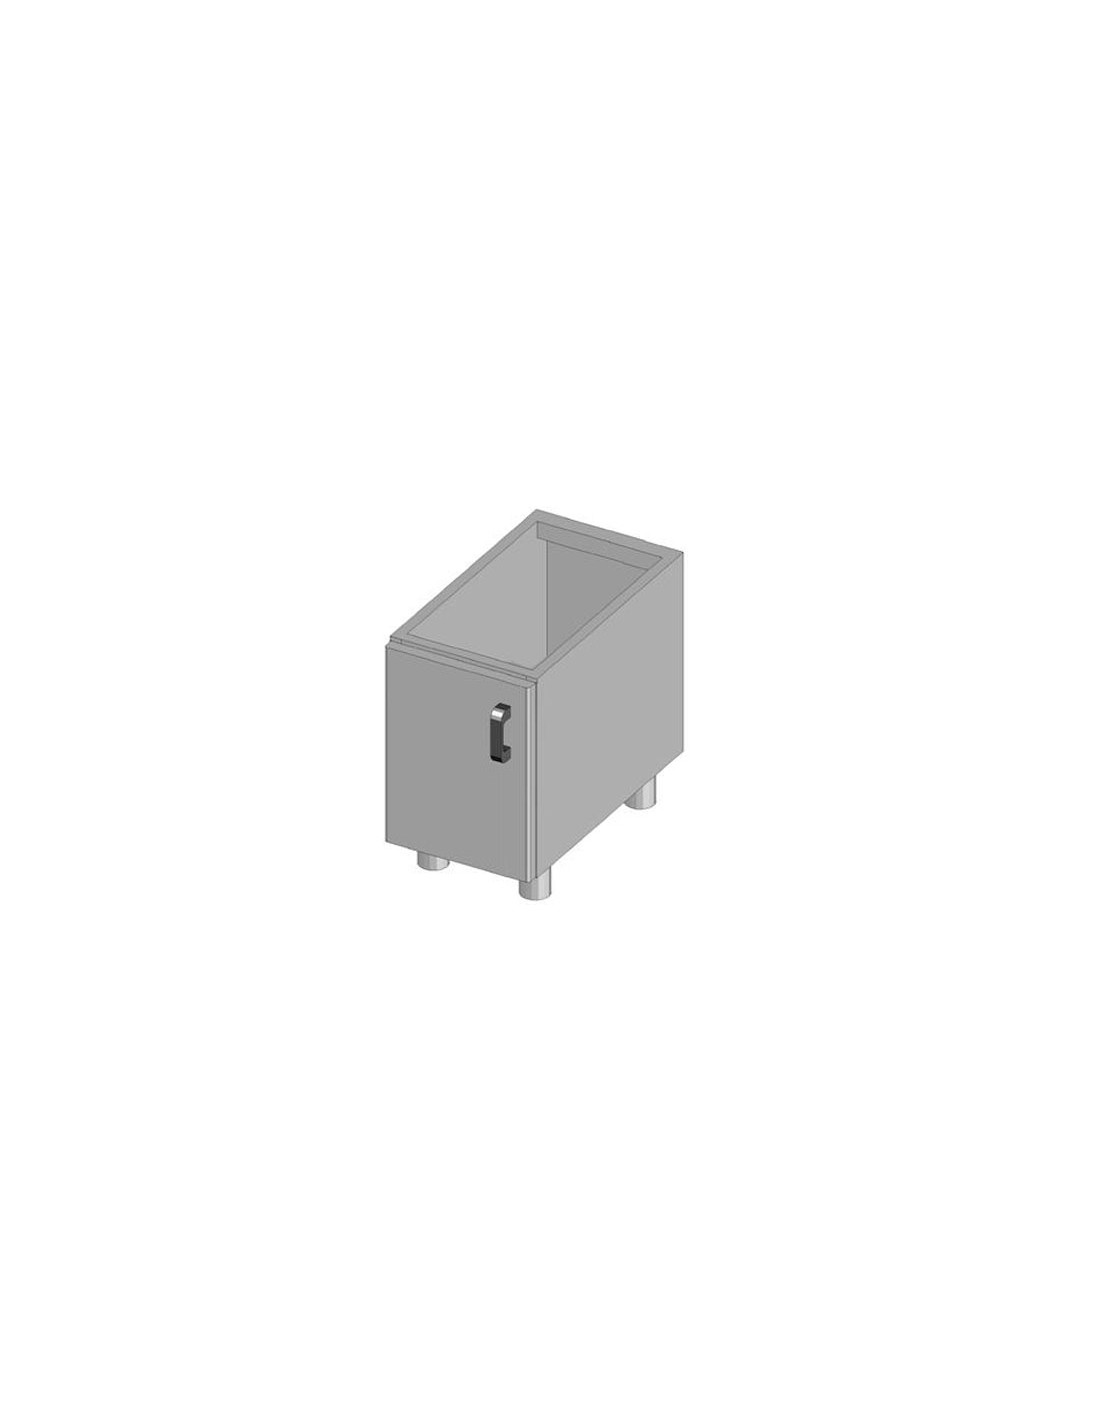 Base with door - Dimensions cm 40 x 61.5 x 60 h